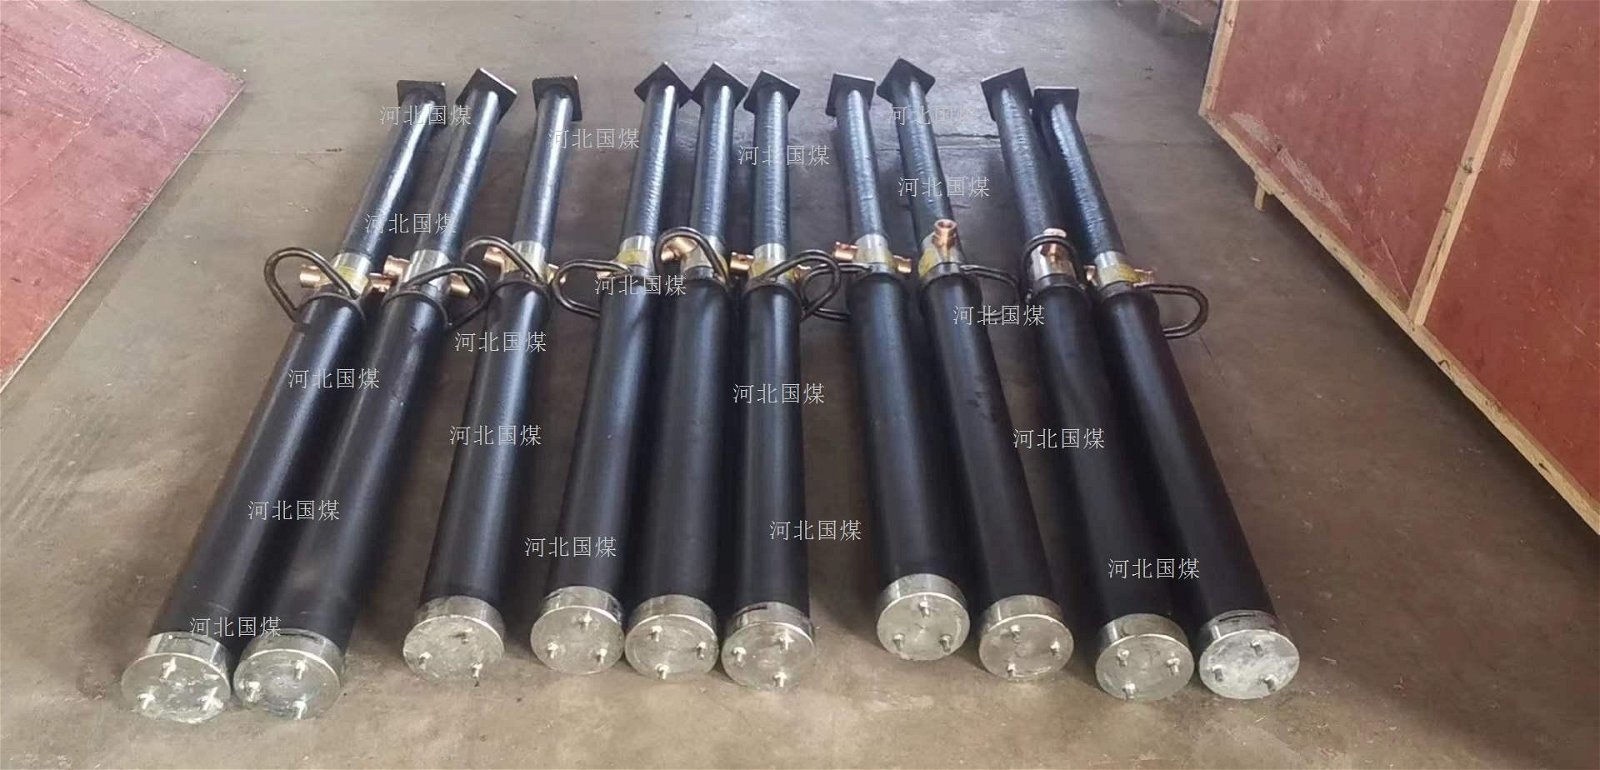 Single hydraulic props for temporary support of fiberglass single hydraulic prop 4